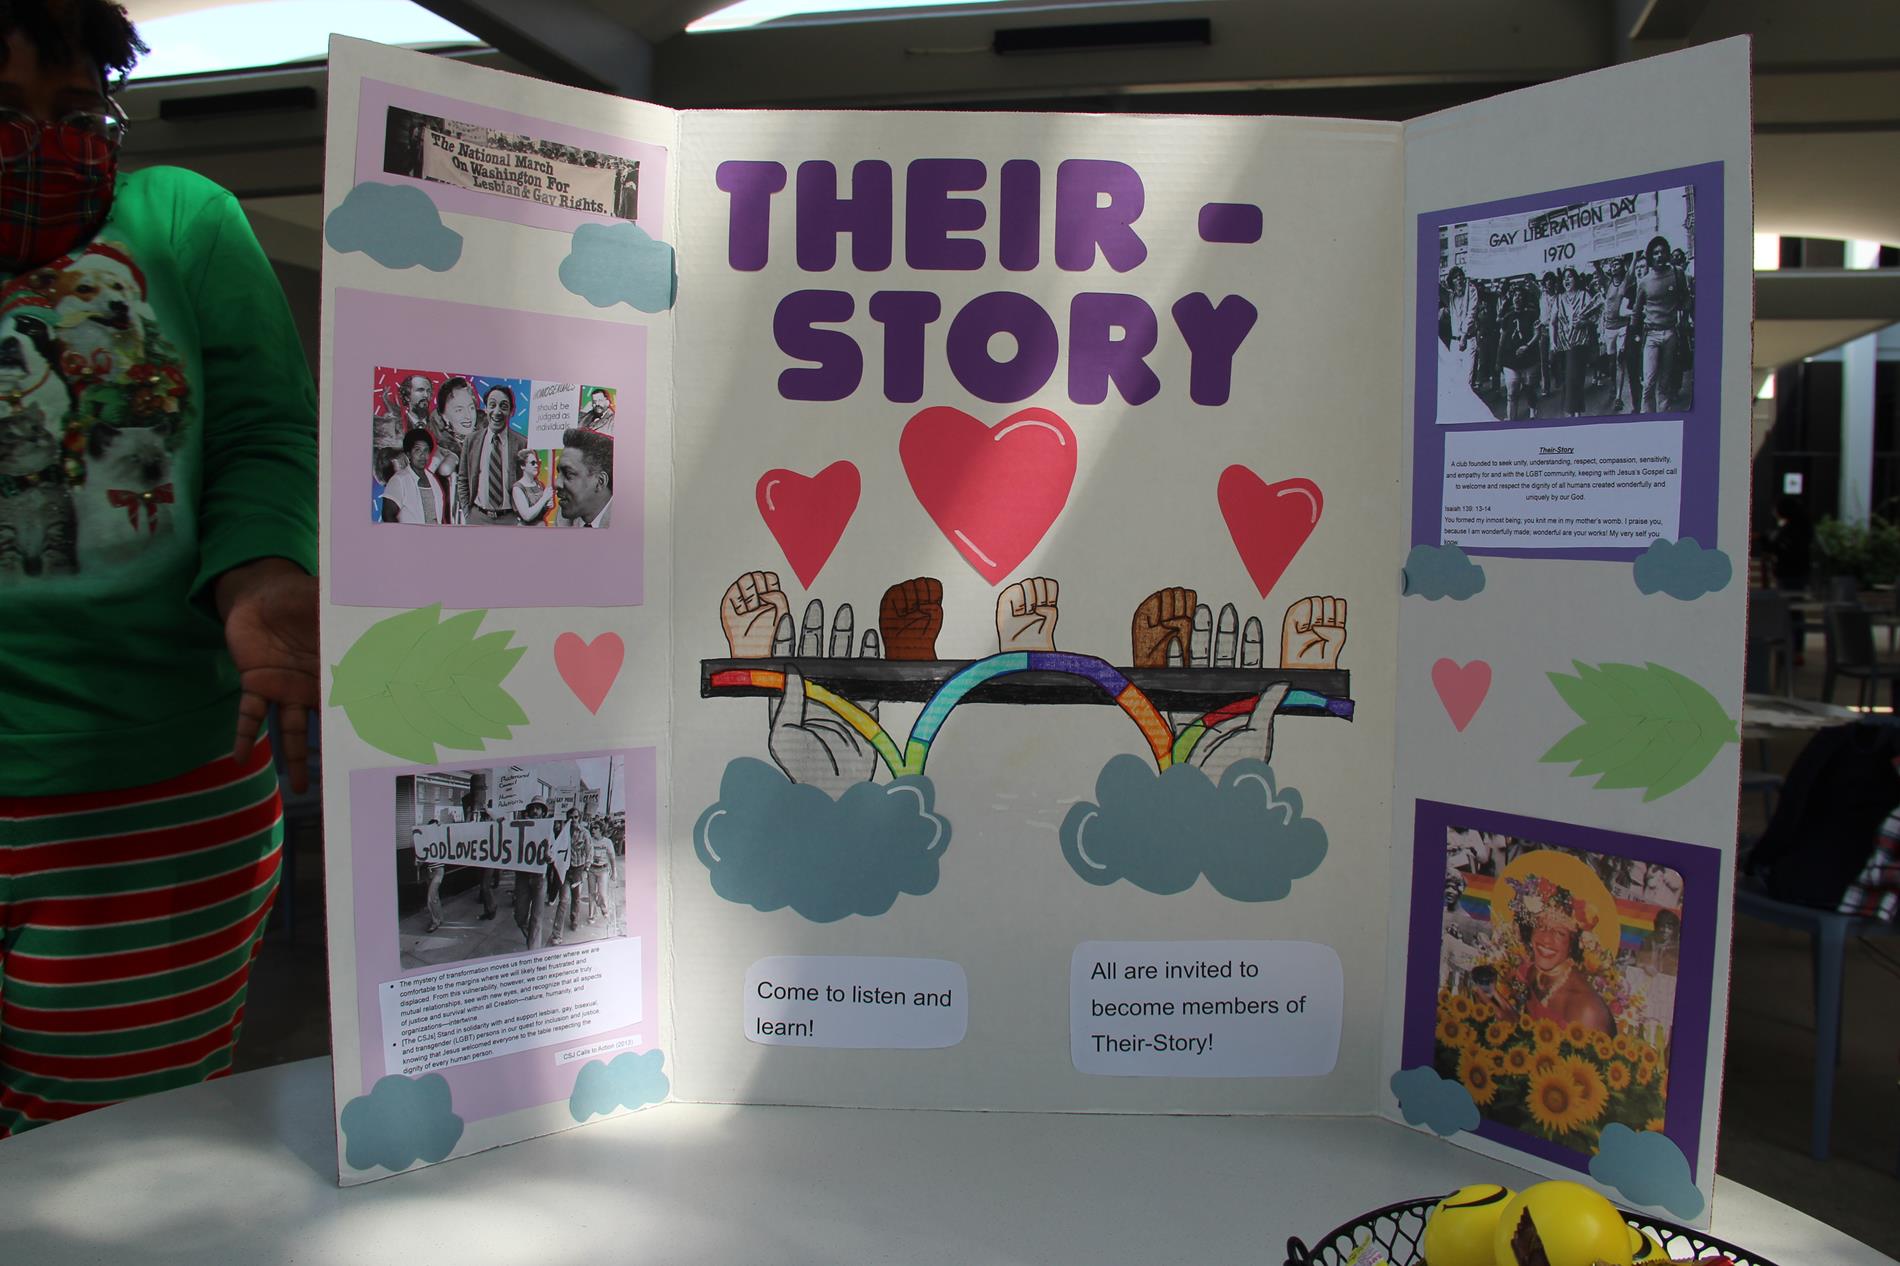 Their-Story posterboard